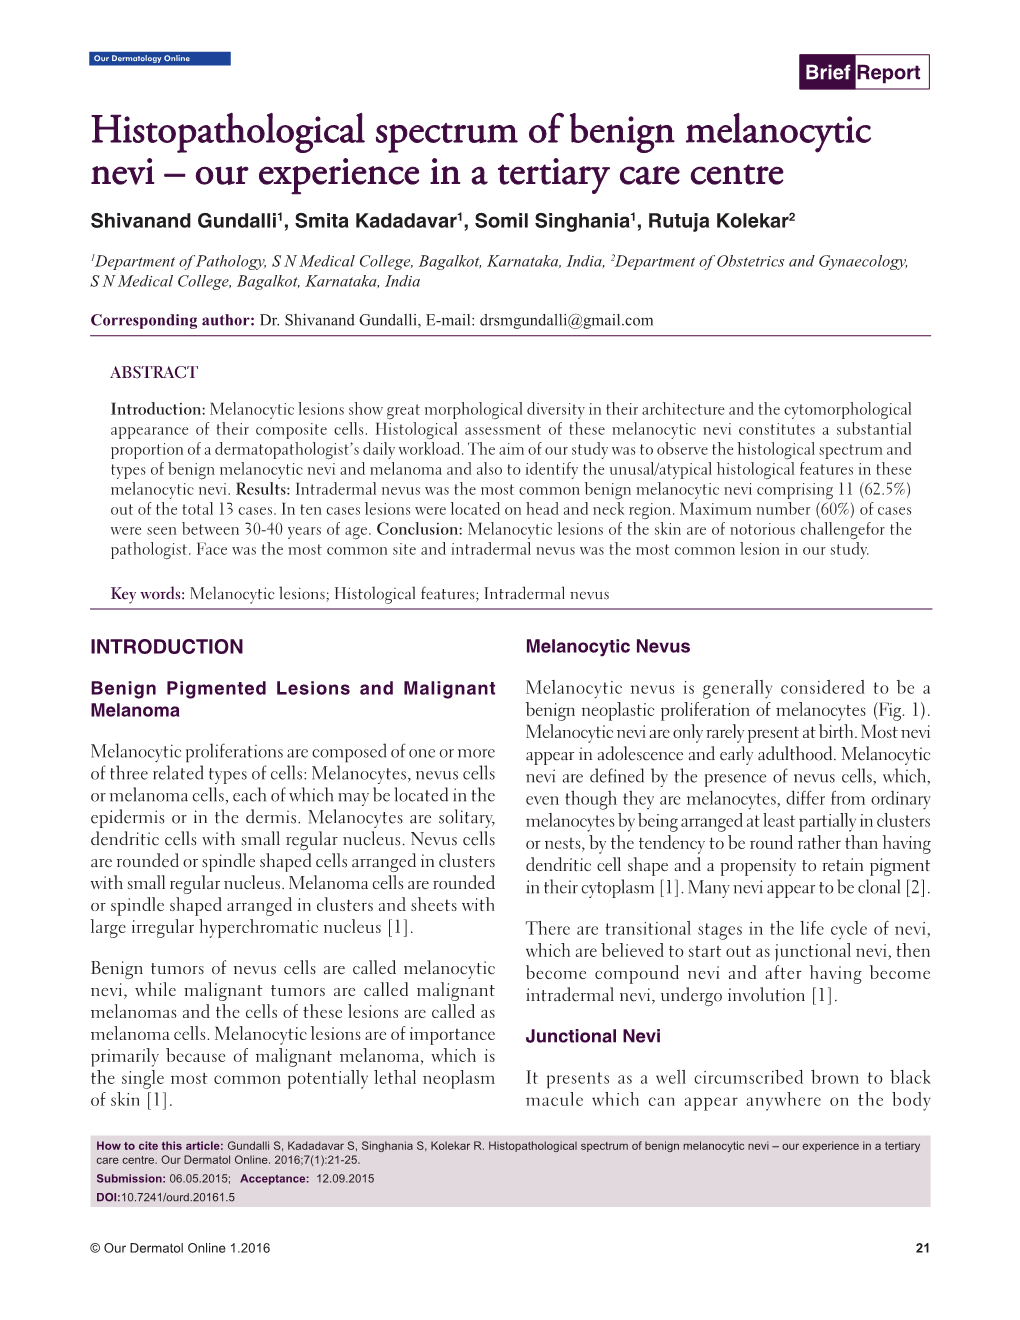 Histopathological Spectrum of Benign Melanocytic Nevi – Our Experience in a Tertiary Care Centre